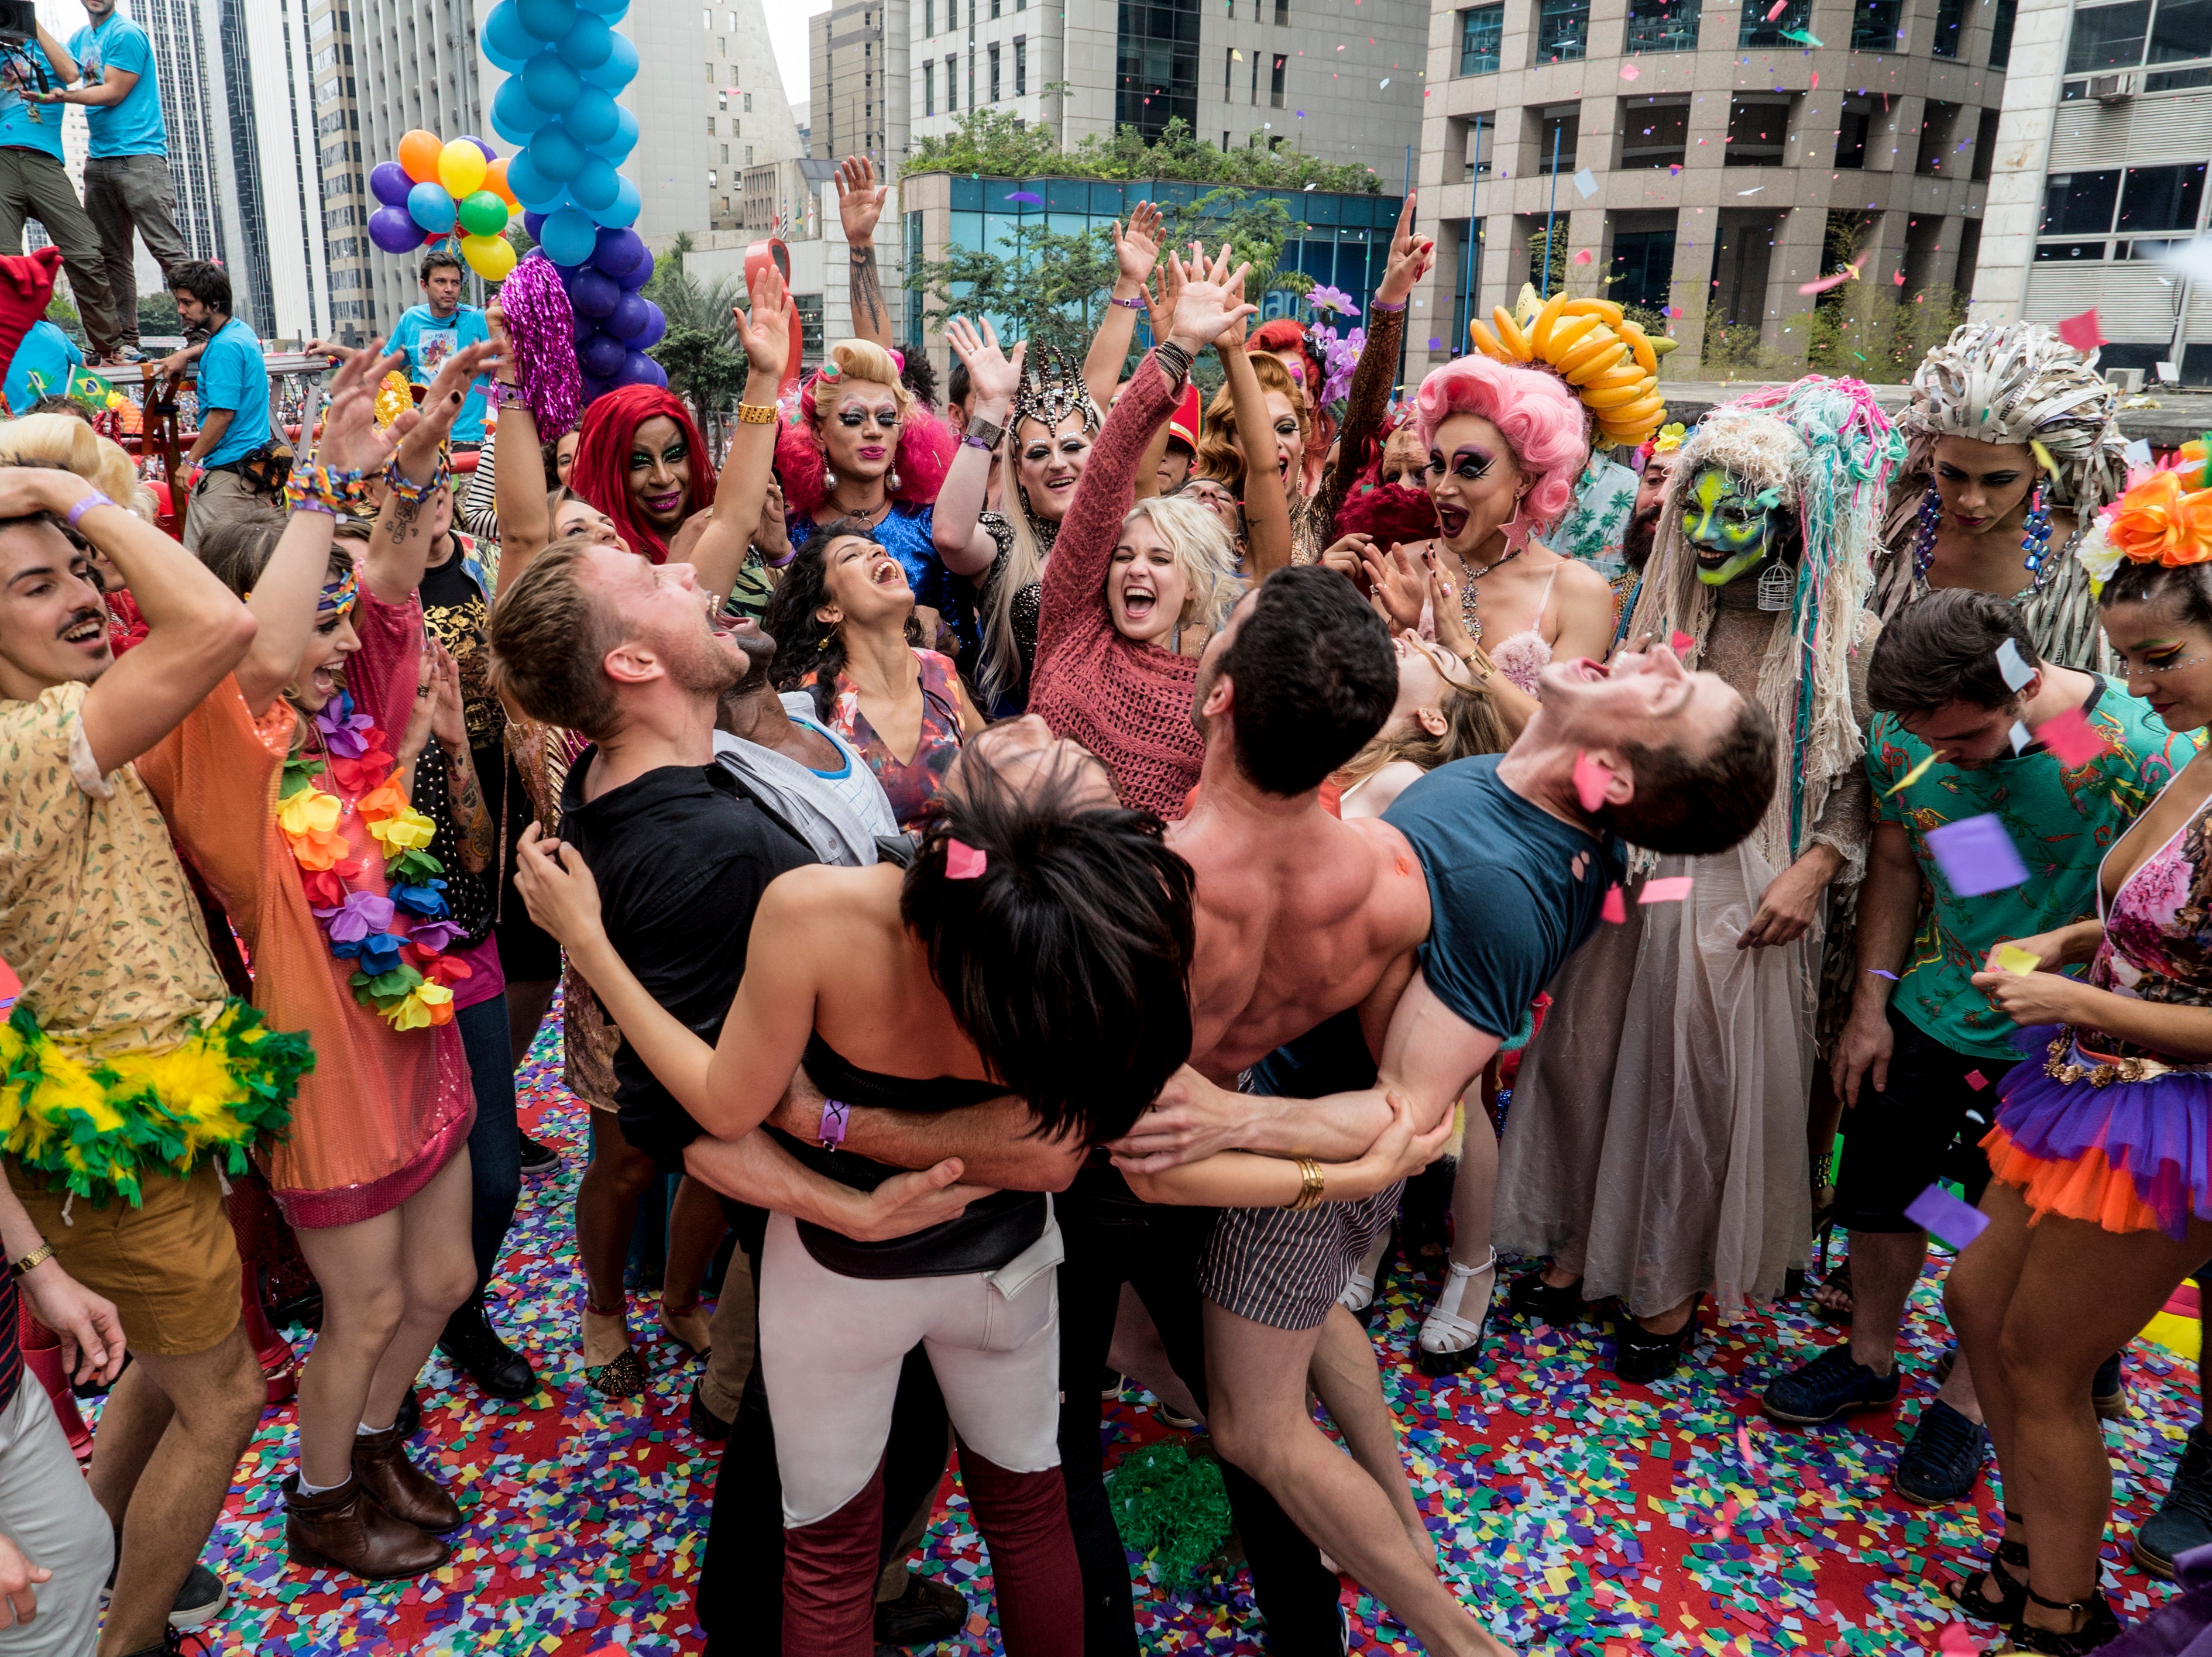 One of Sense8’s second-season episodes features a sequence at a Pride festival in Sao Paulo